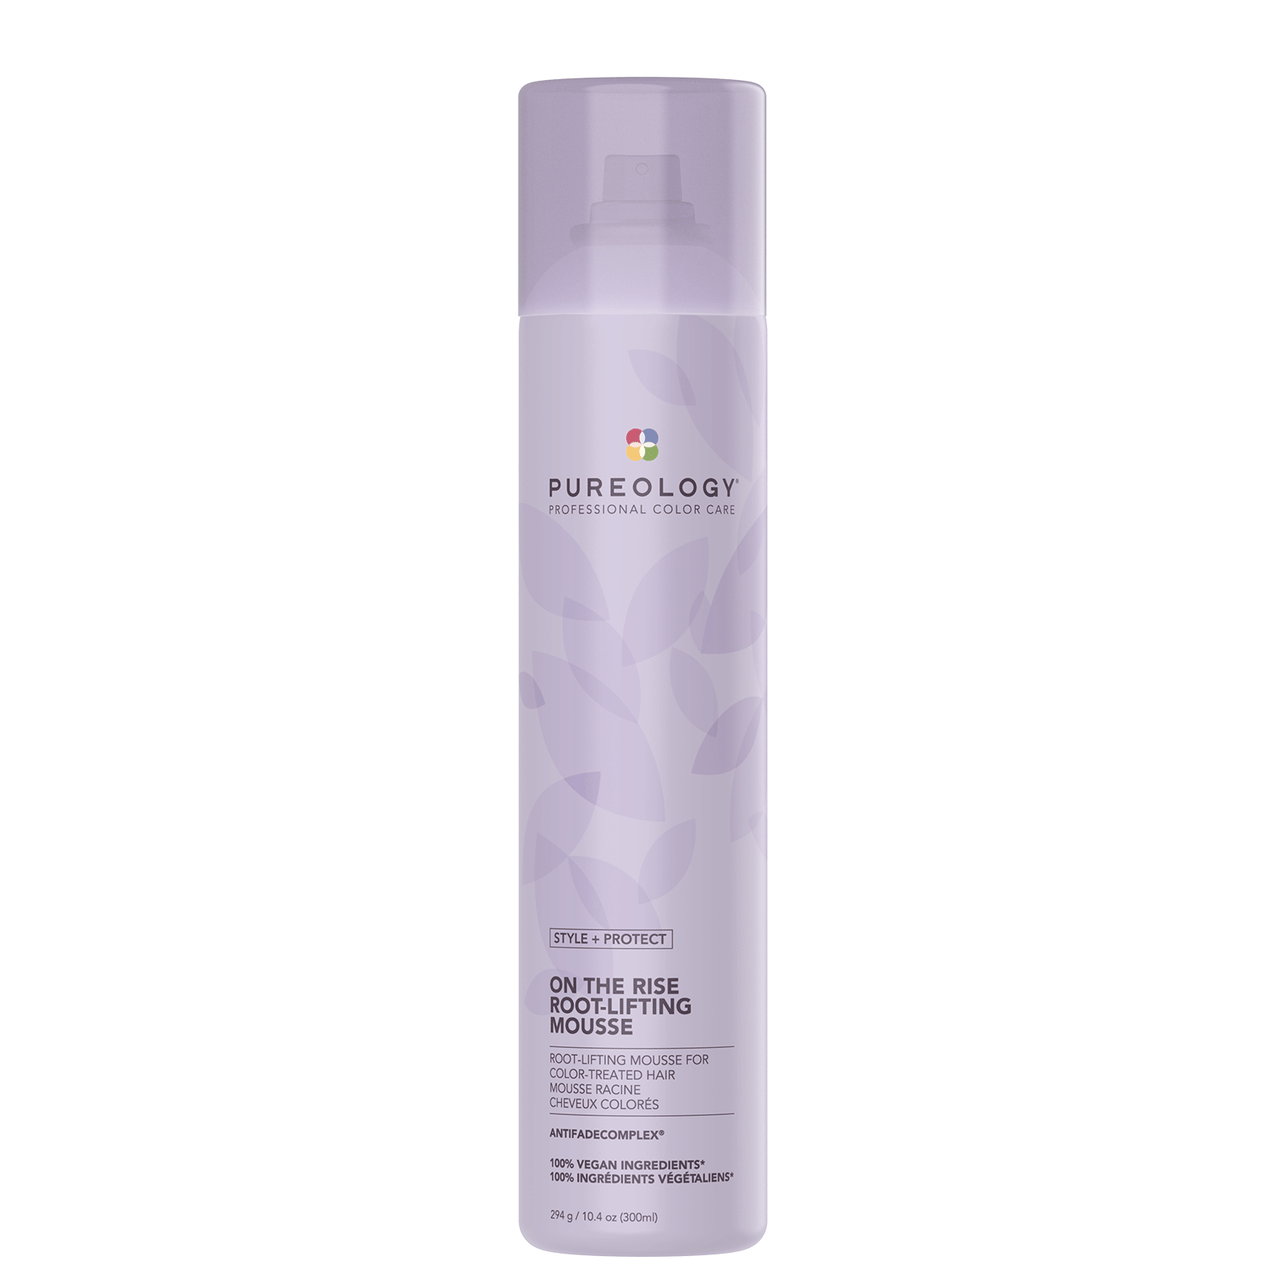 Pureology Style & Protect On the Rise Root Lifting Mousse 10.4 fl. oz.